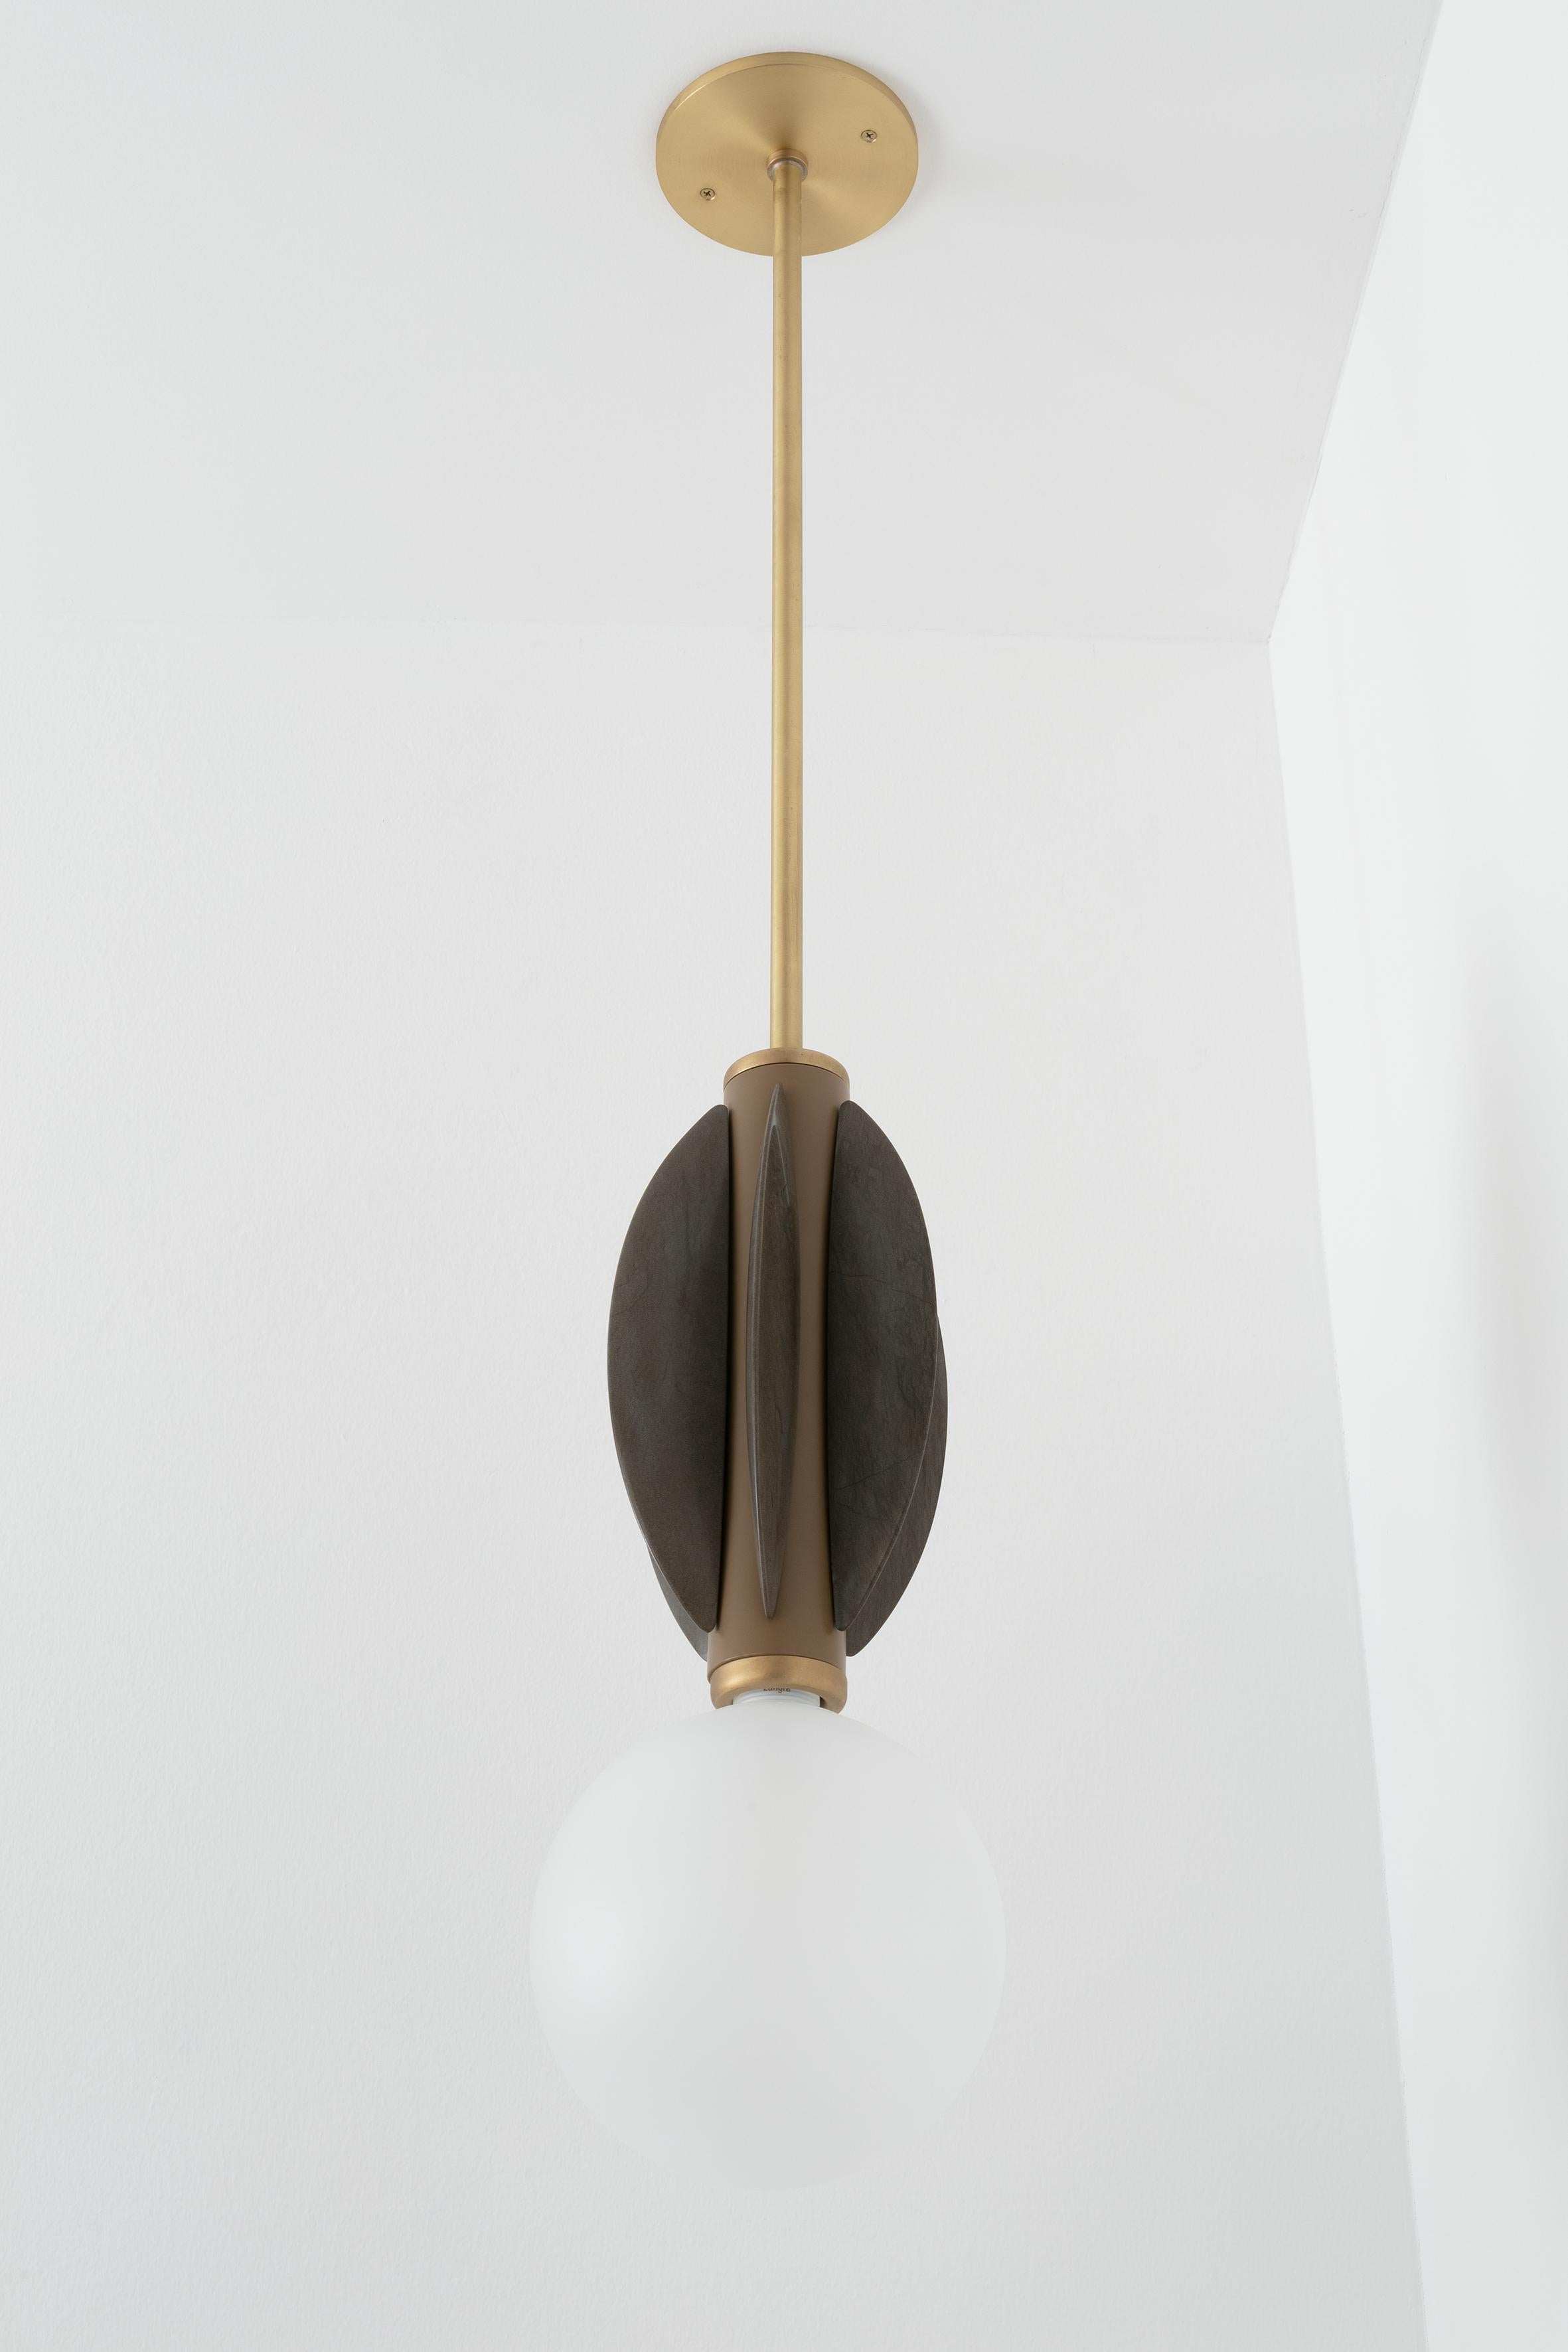 Monarch ceiling mounted - Carla Baz
Dimensions: ø 16 x H 112 cm
Weight: 6 kg
Material: Painted metal, Brass, Marble

Monarch lighting series has been developed with the idea of opulence and fine details all the while keeping with our intention of